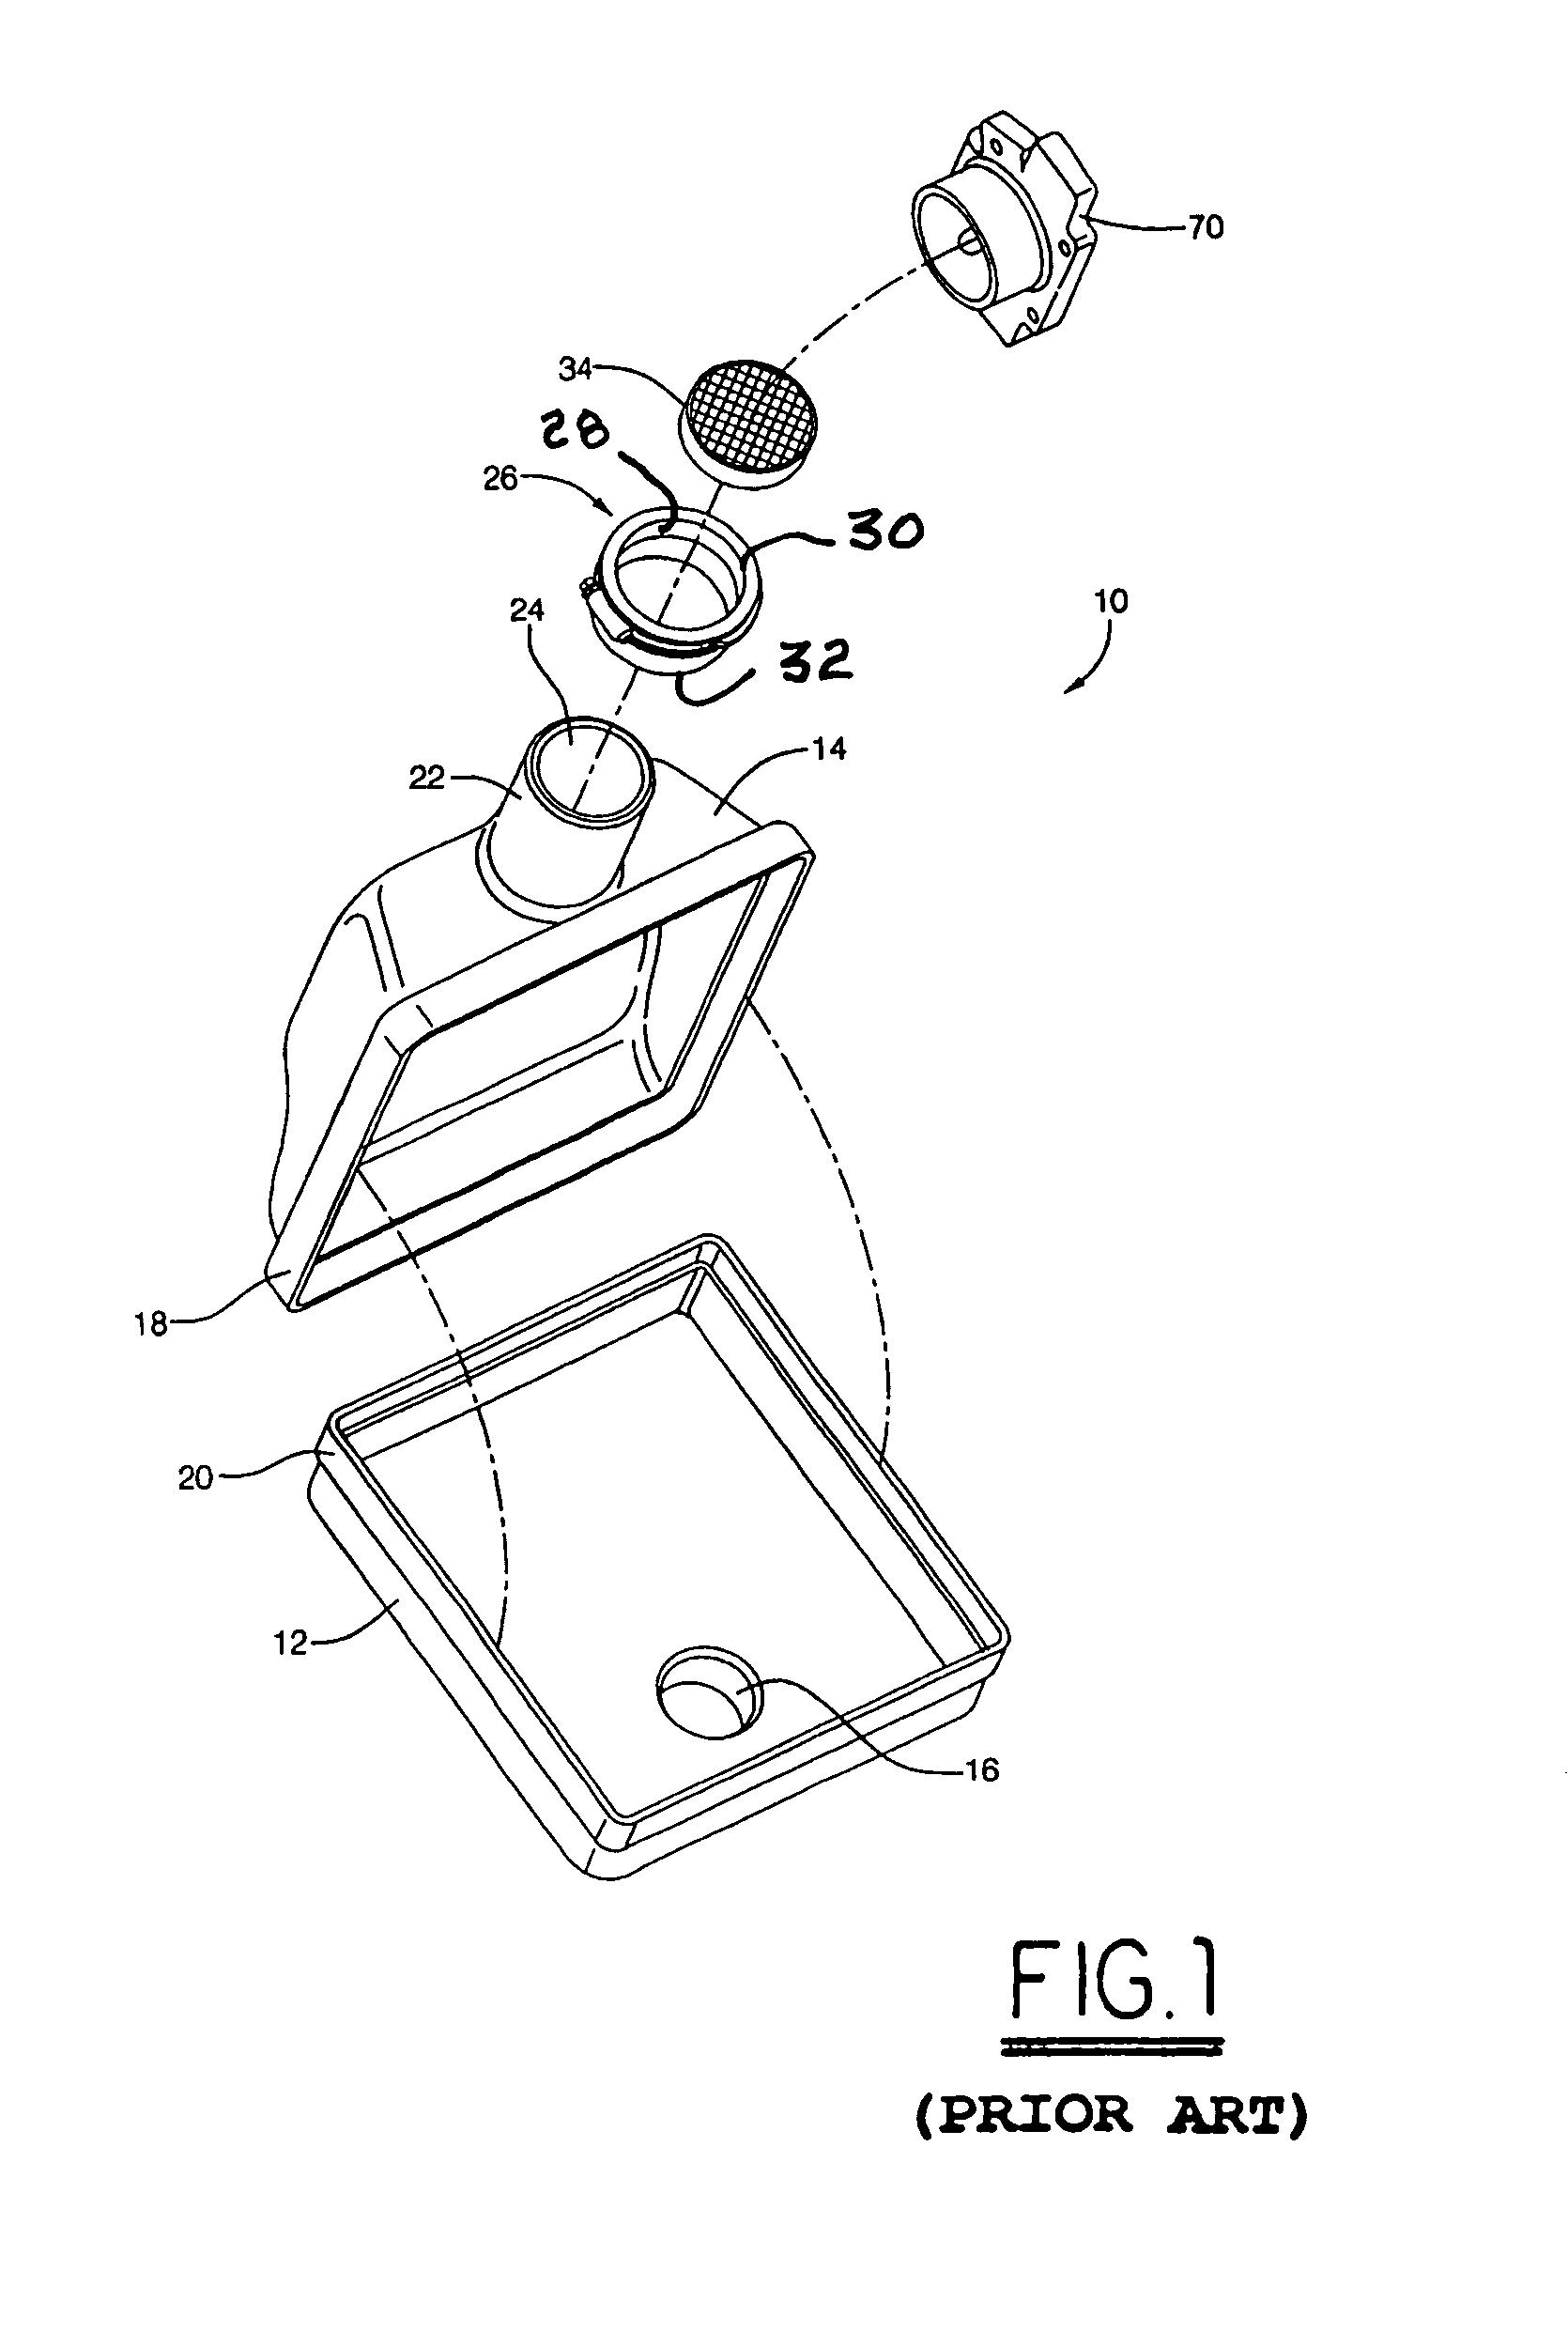 Low-resistance hydrocarbon adsorber cartridge for an air intake of an internal combustion engine